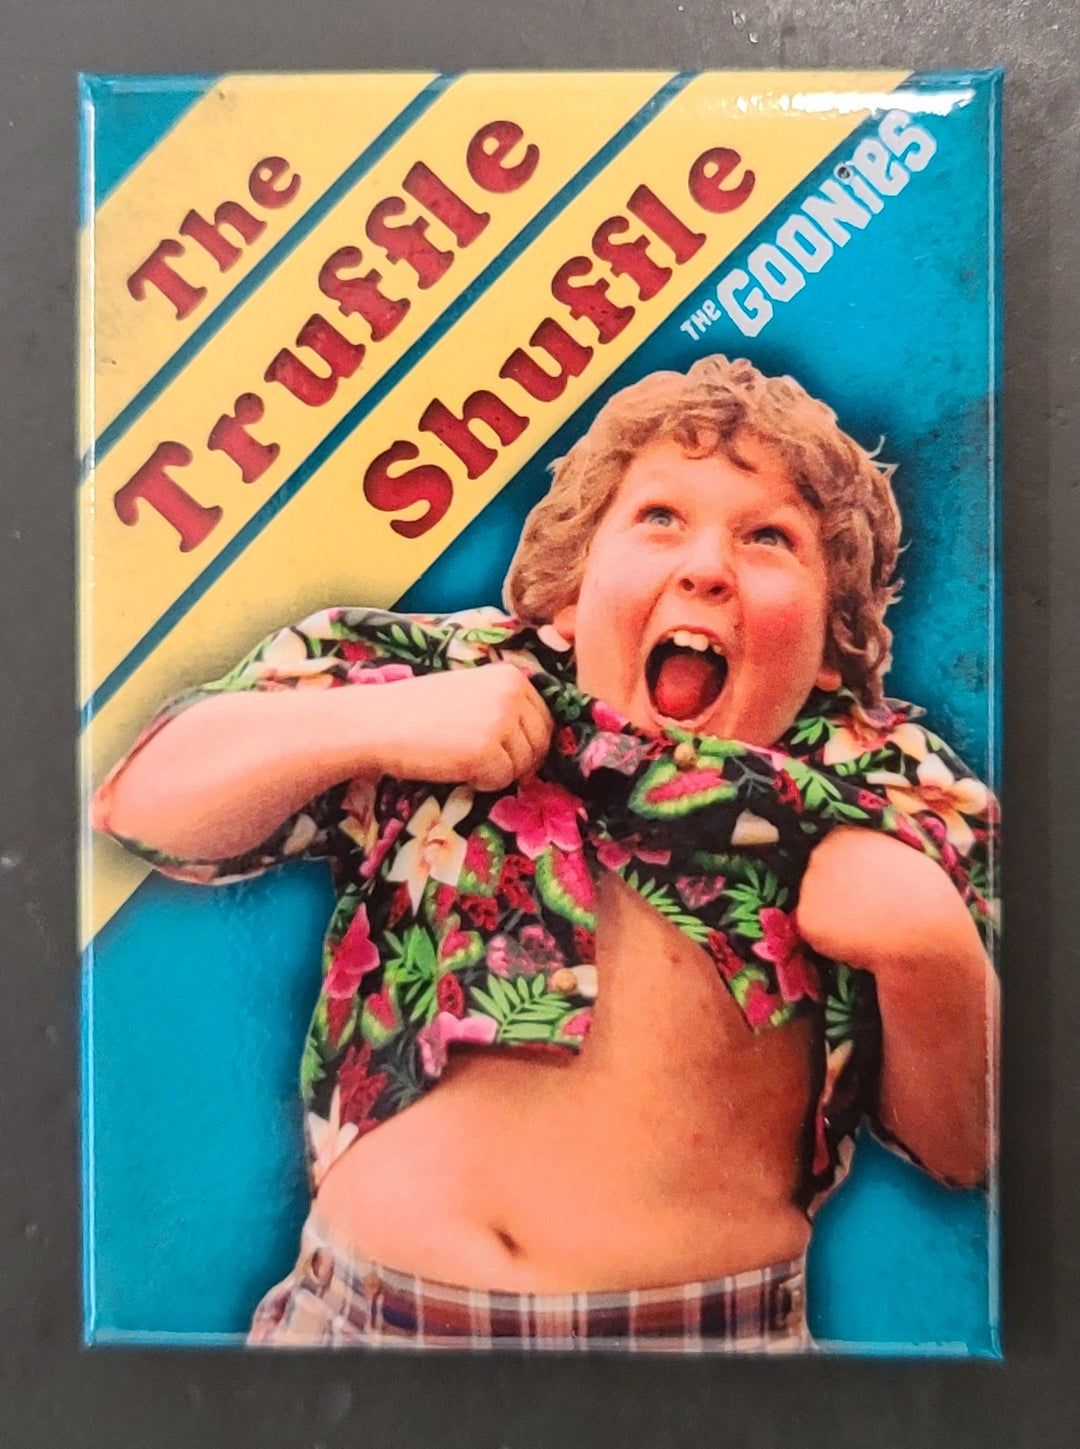 The Truffle Shuffle - The Goonies Magnet